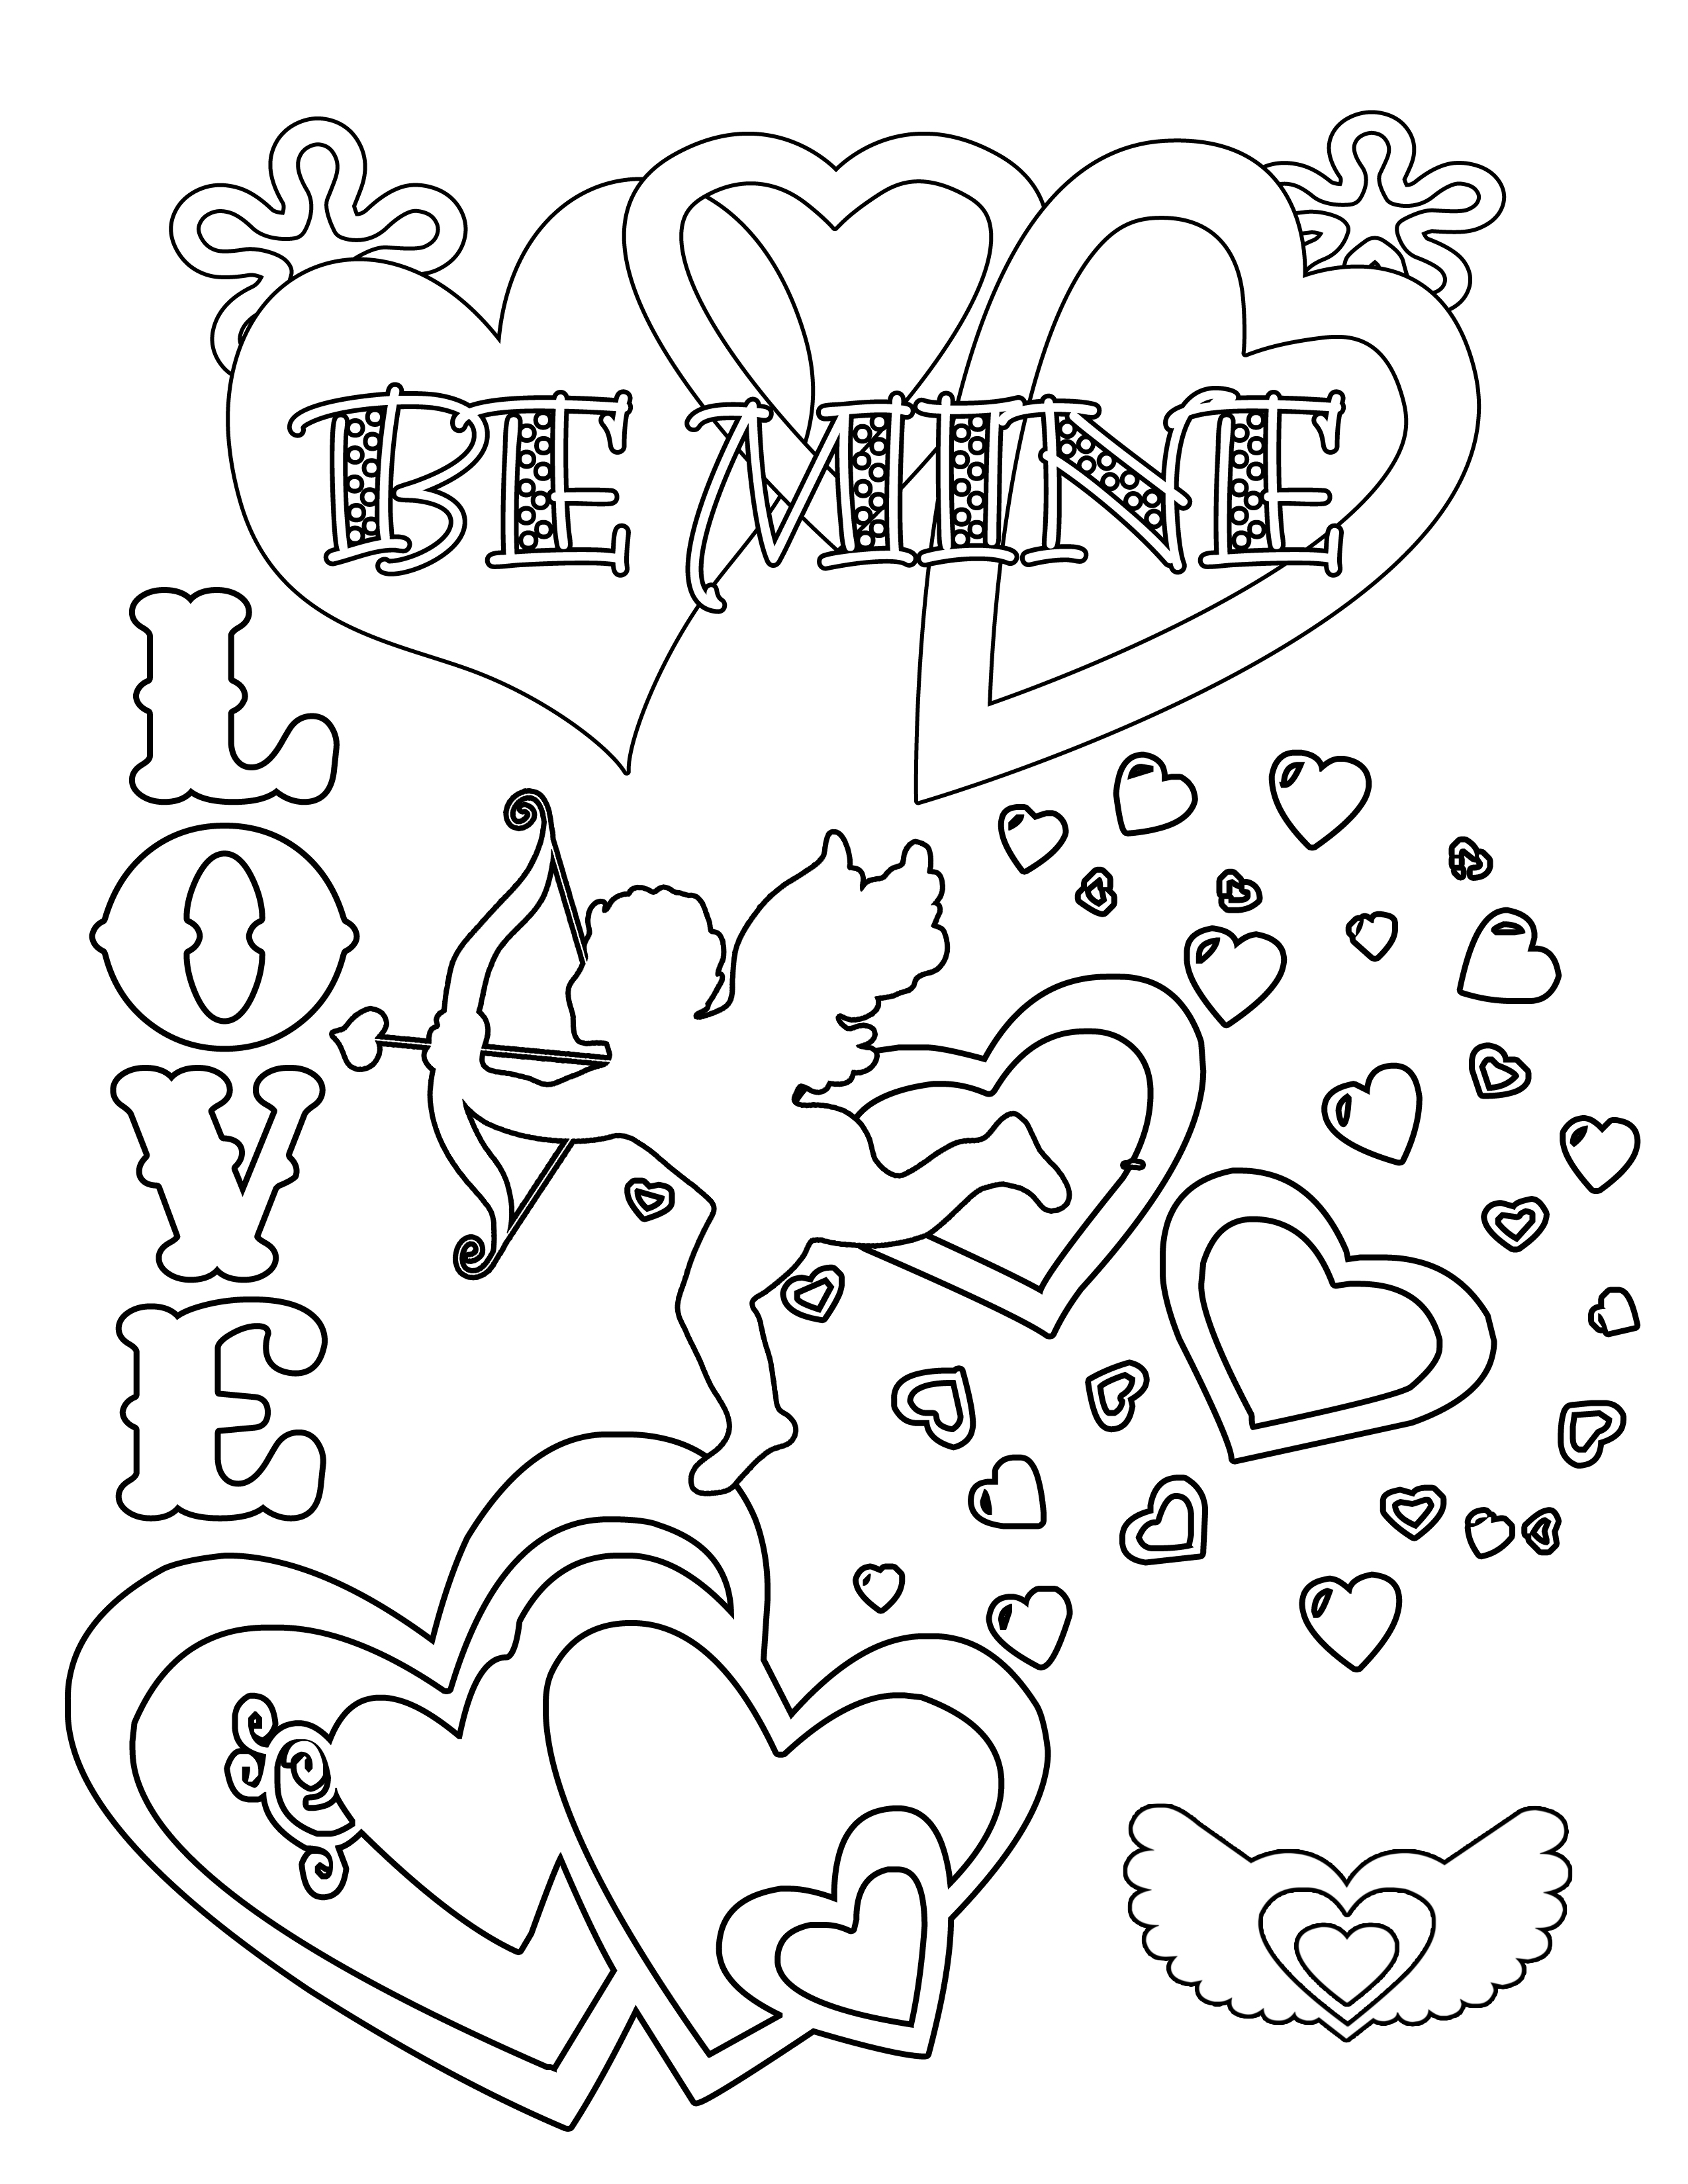 Party Simplicity Free Valentines Day Coloring Pages and ...